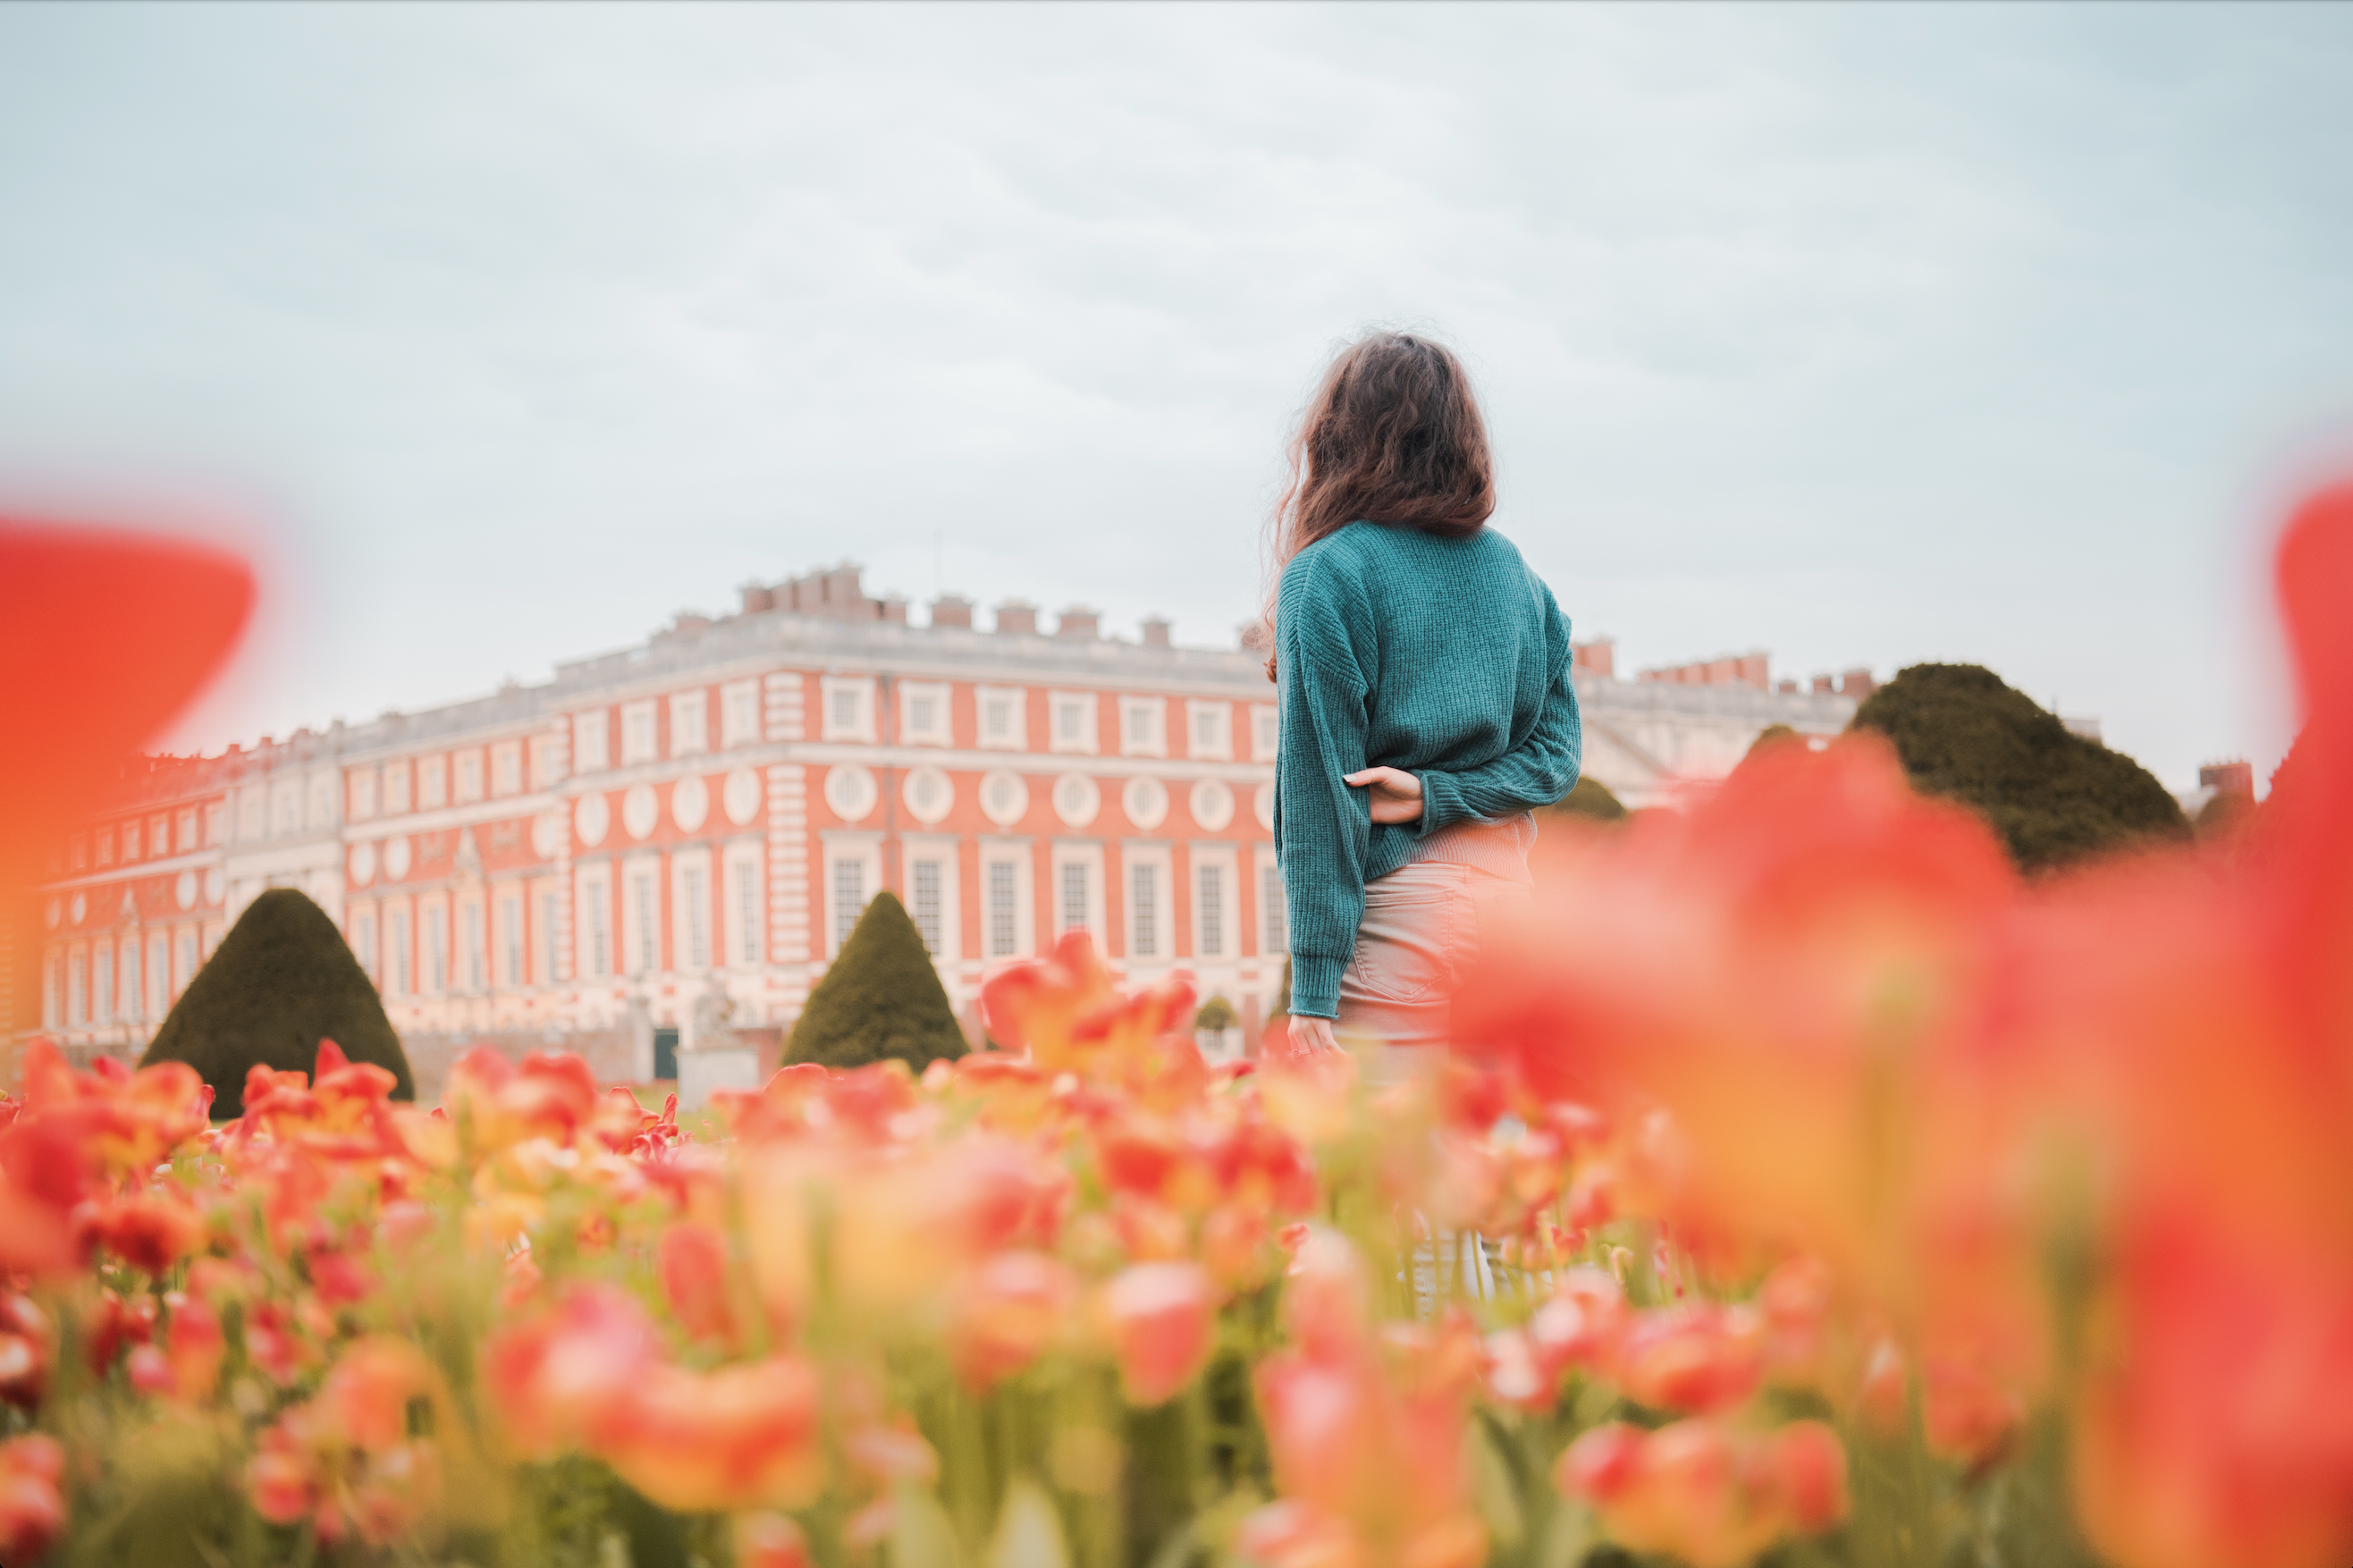 A girl in turquoise sweater standing in red tulips outside of a red palace